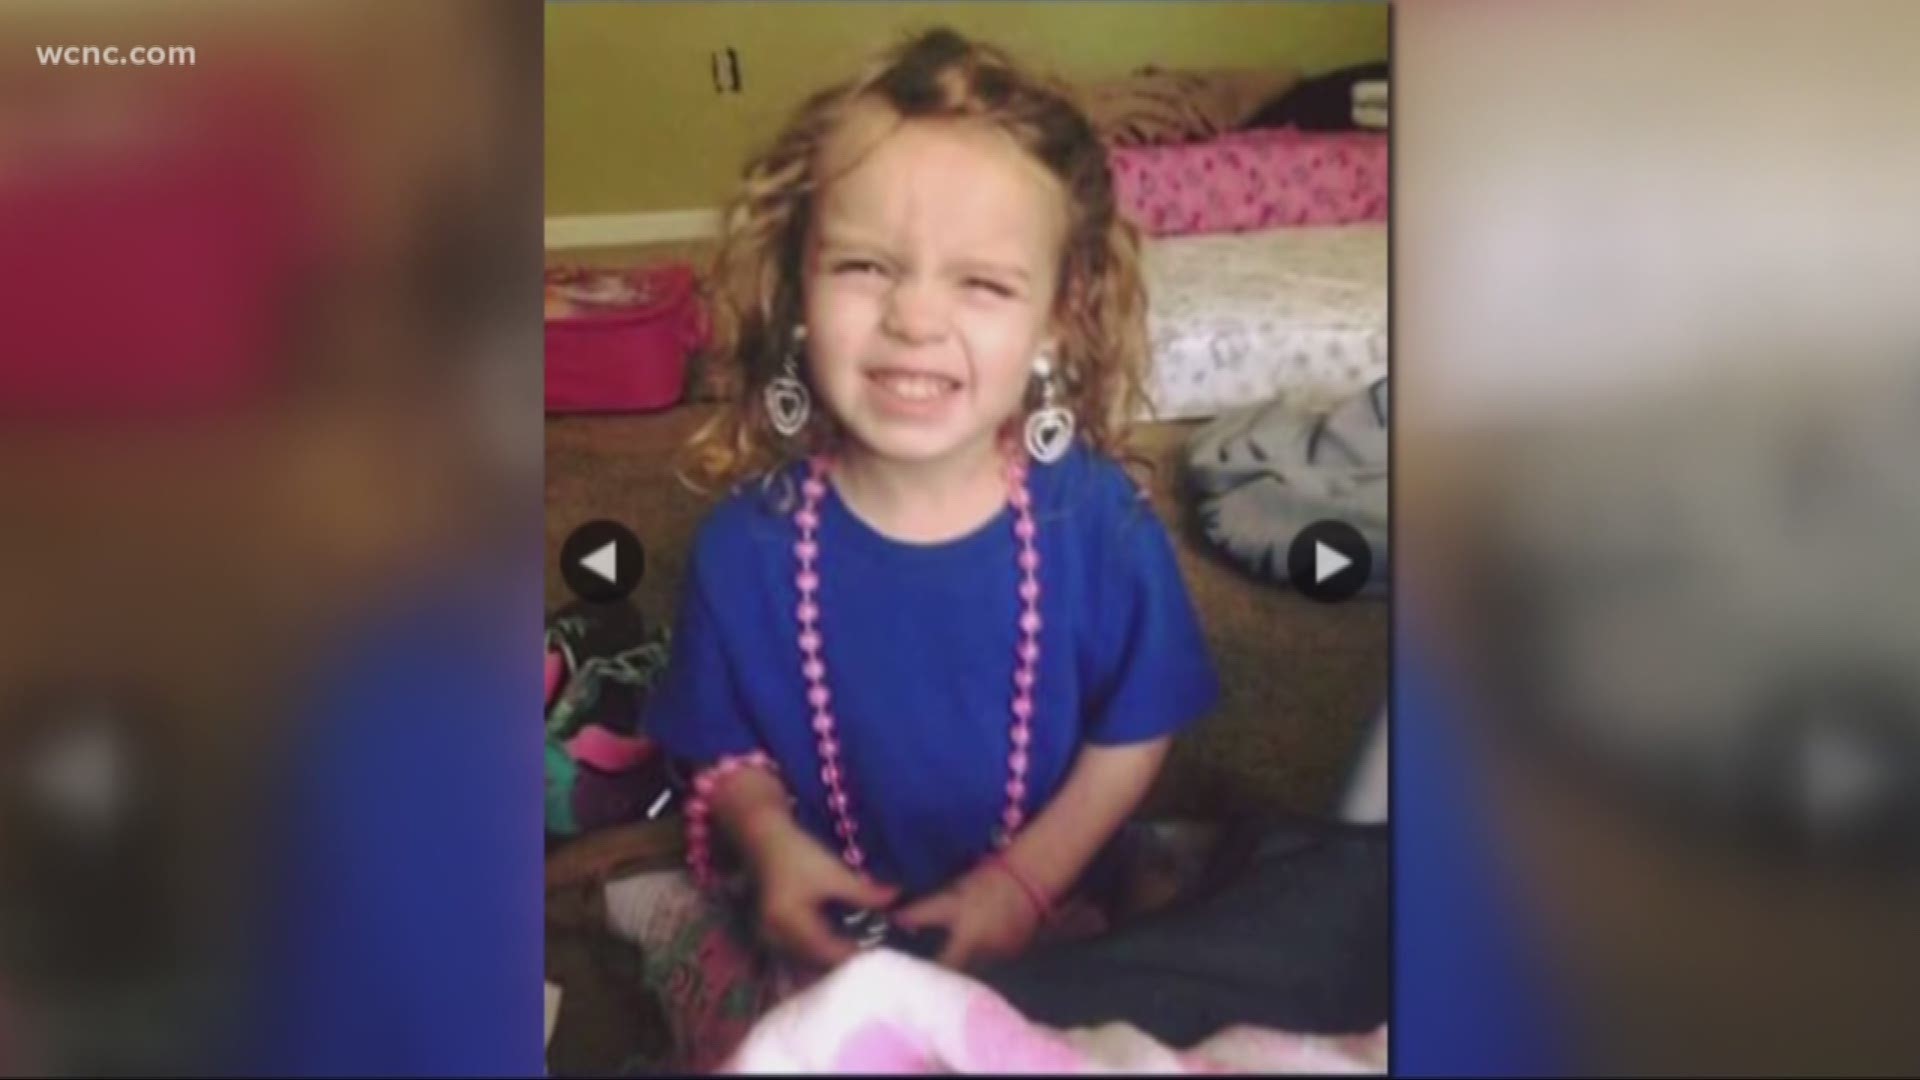 William McCullen was found guilty by a jury of killing 3-year-old Jordyn Dumont and burying her body near her mother's home in Bessemer City last August.